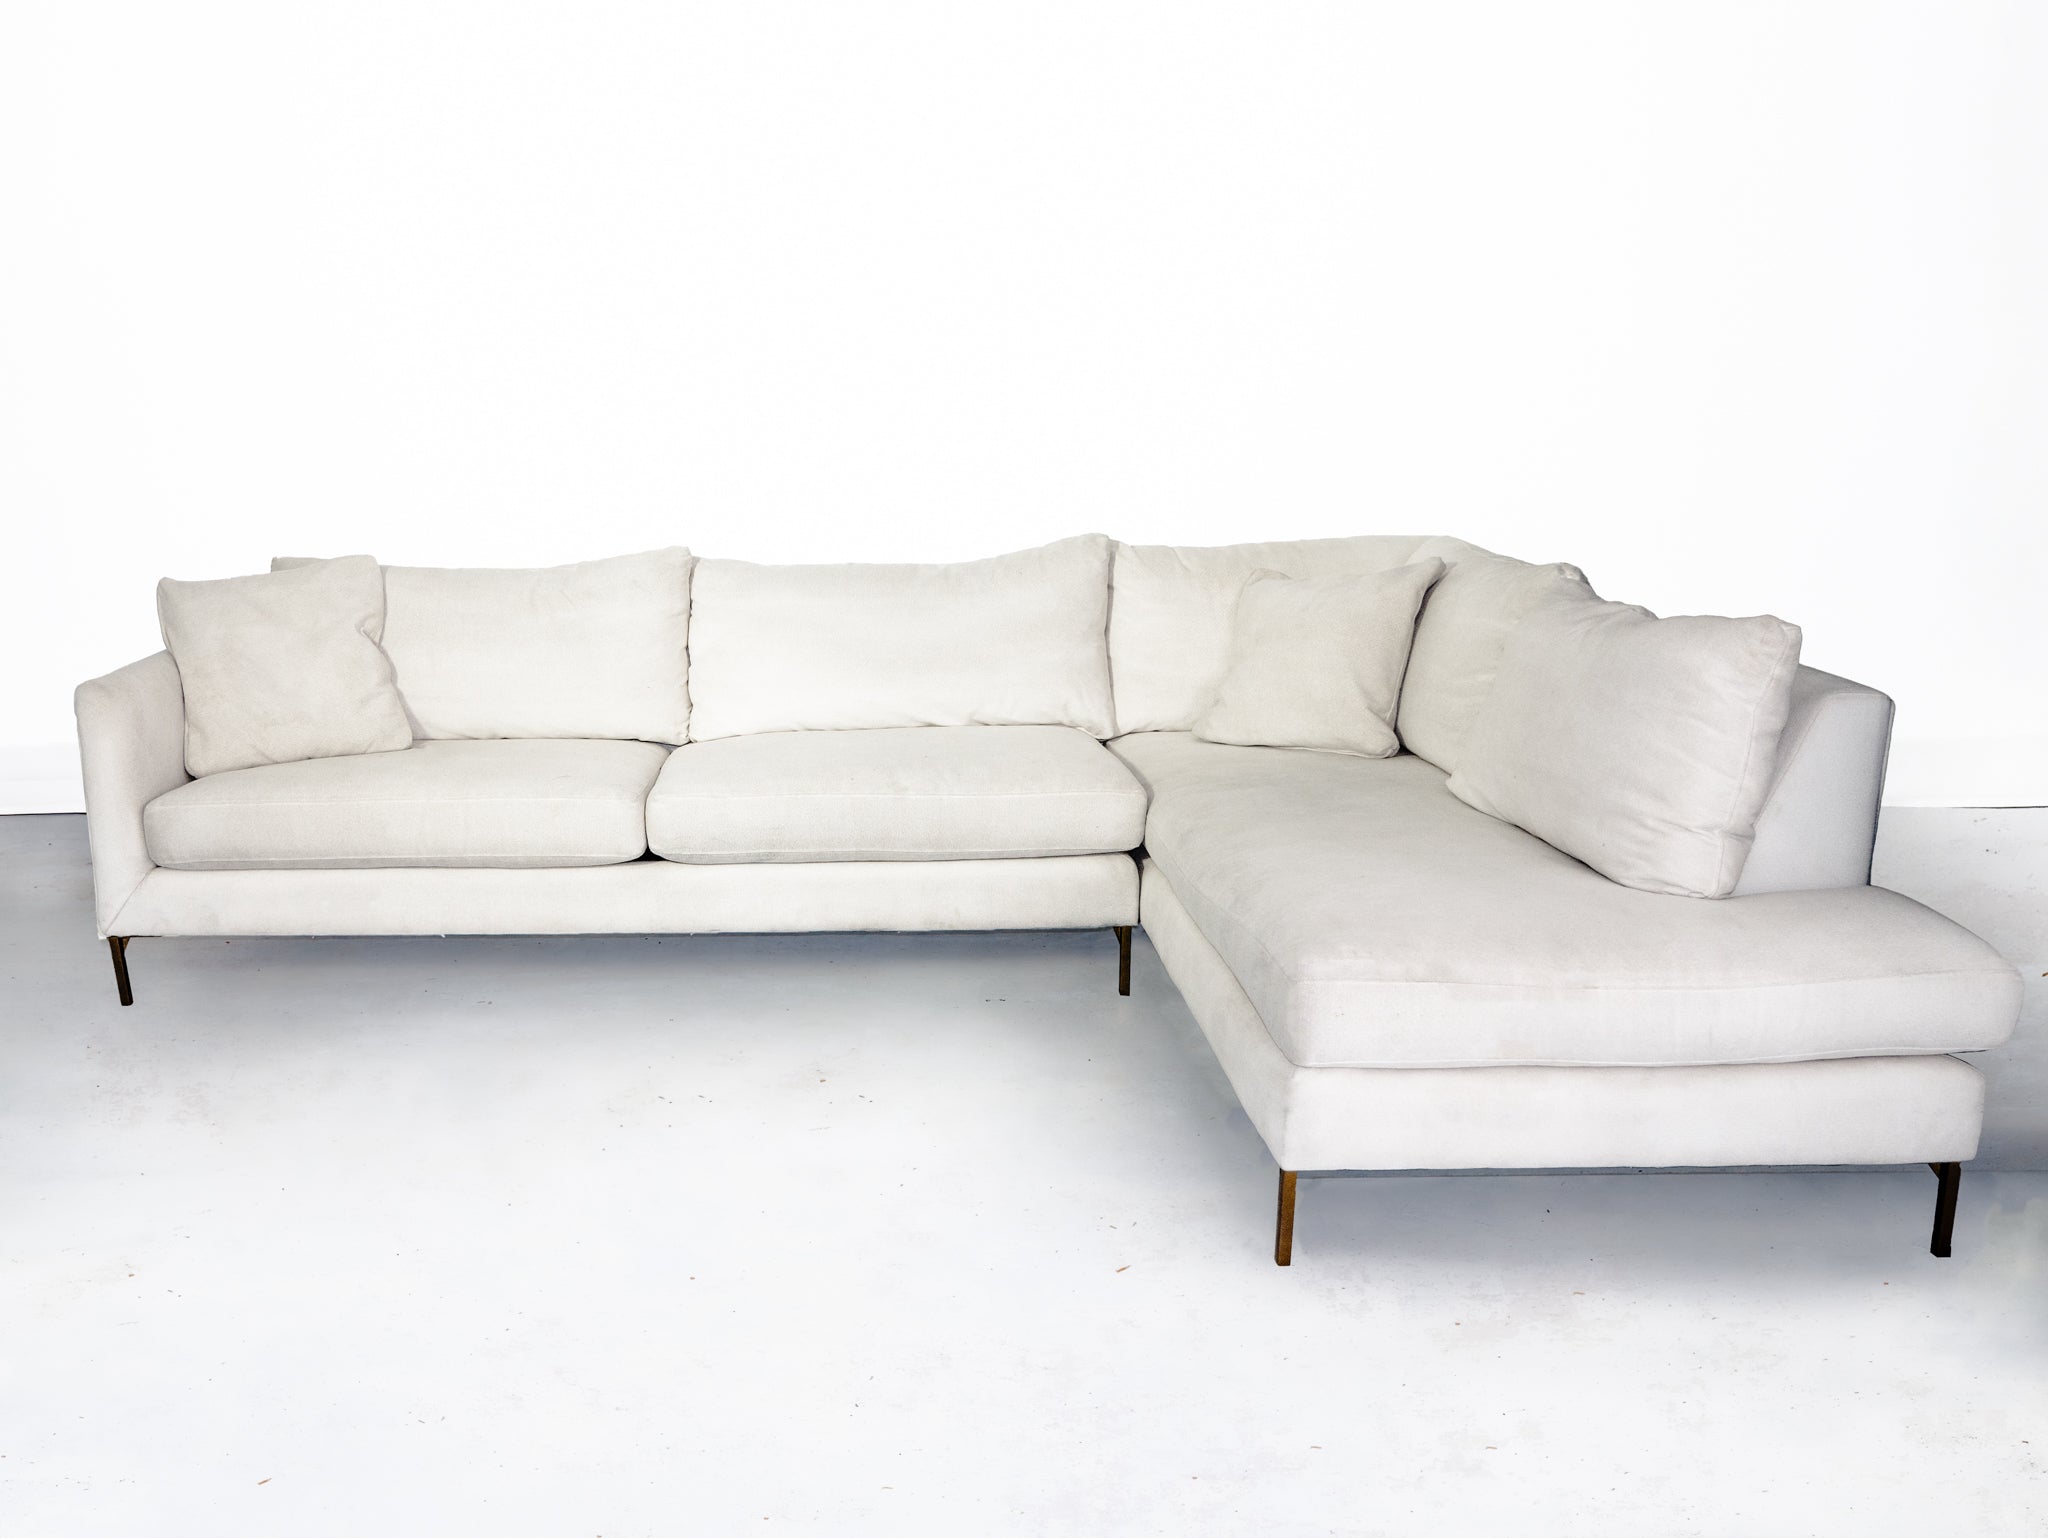 Bloomingdales Artisanal Collection Cream Sectional